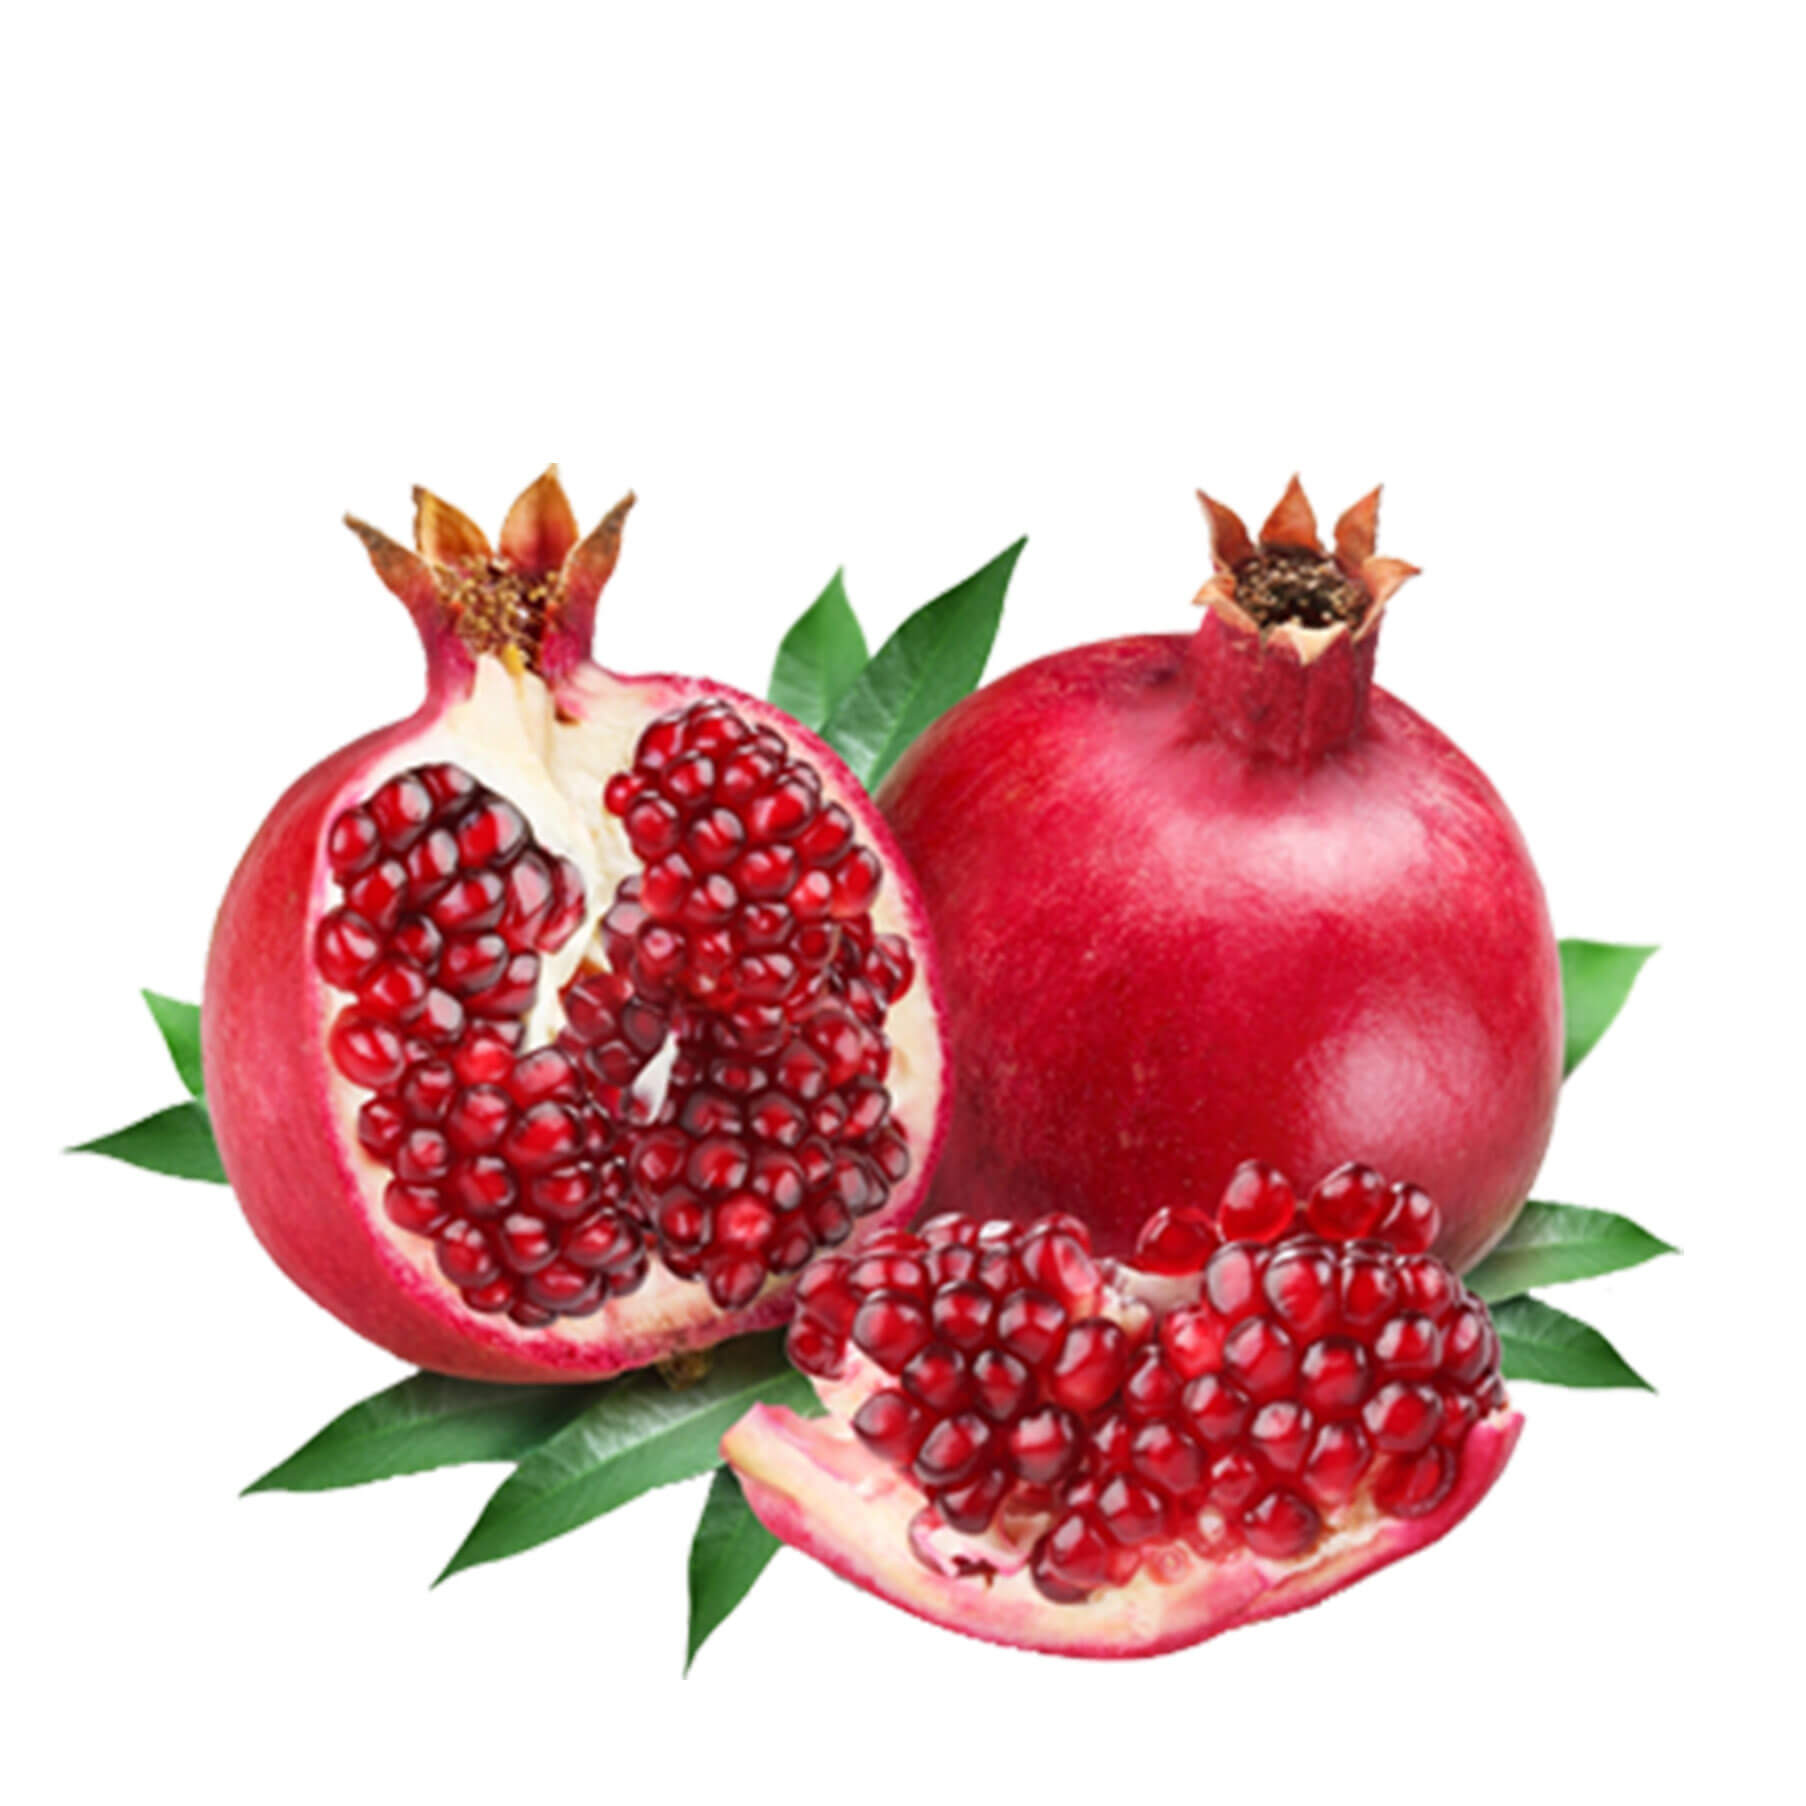 Pomegranate, pomegranate juice, benefits of pomegranate, best juice in cholesterol, best juice in high BP, pomegranate that protects against cancer, health benefits of pomegranate, pomegranate that increases blood